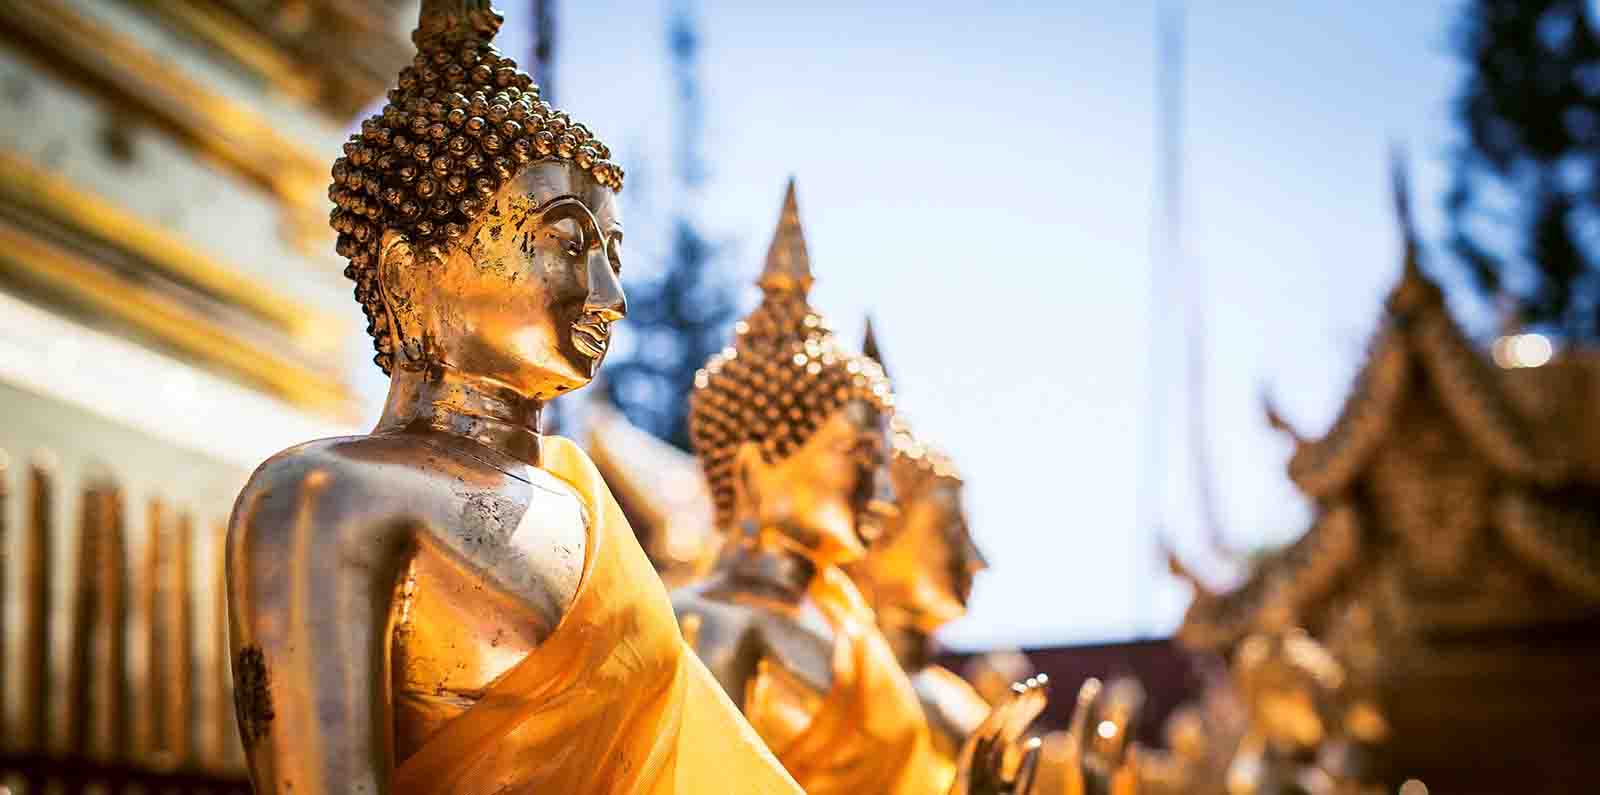 Chiang Mai voted best city in Asia by readers of Travel + Leisure